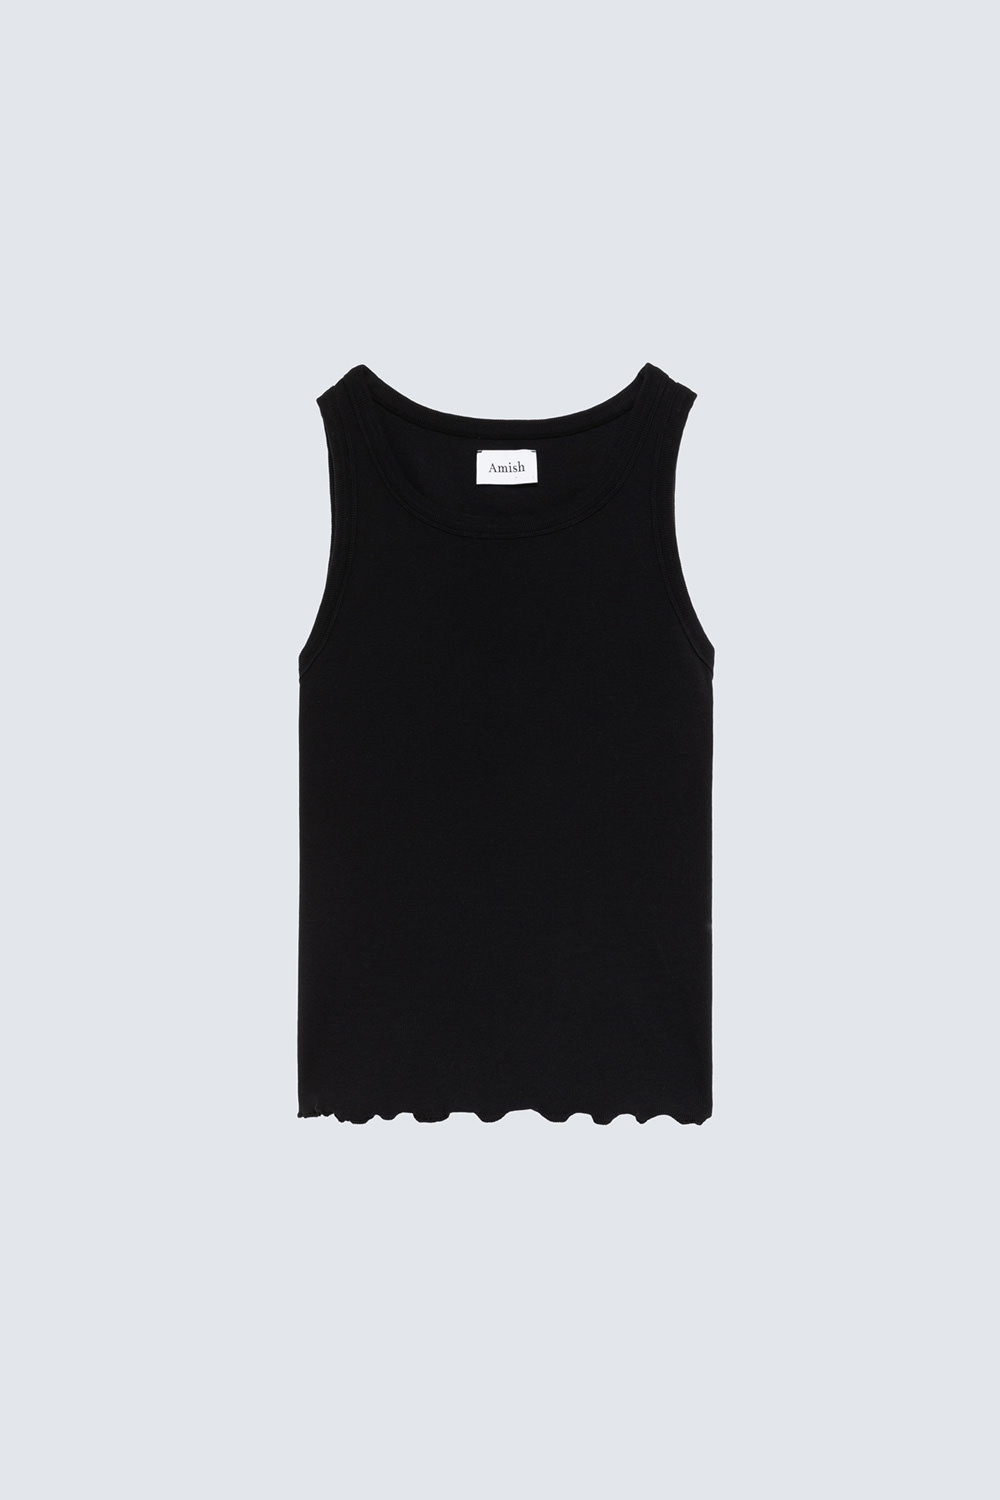 AMISH: TANK TOP IN COTTON